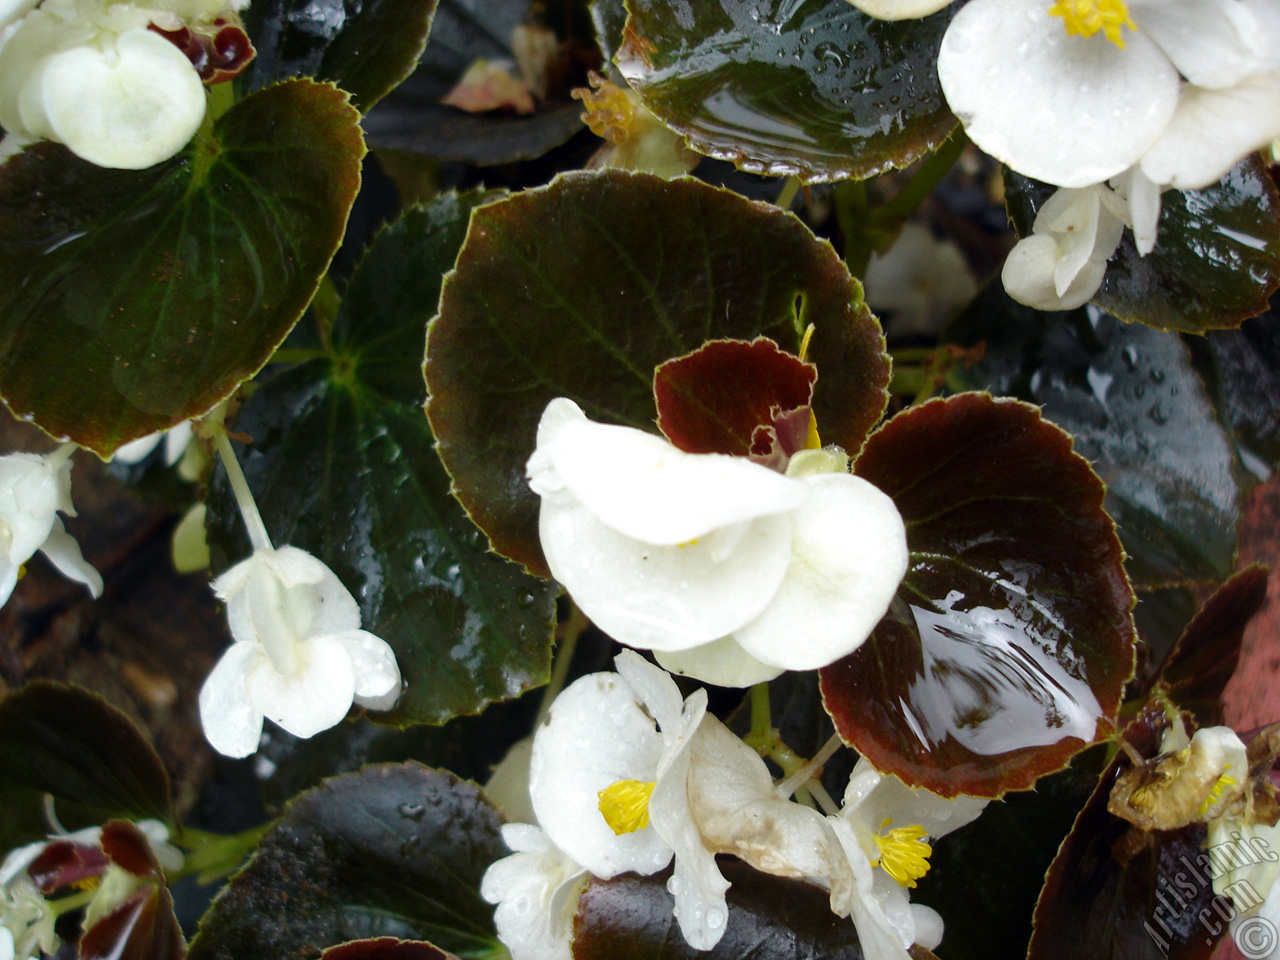 Wax Begonia -Bedding Begonia- with white flowers and brown leaves.
